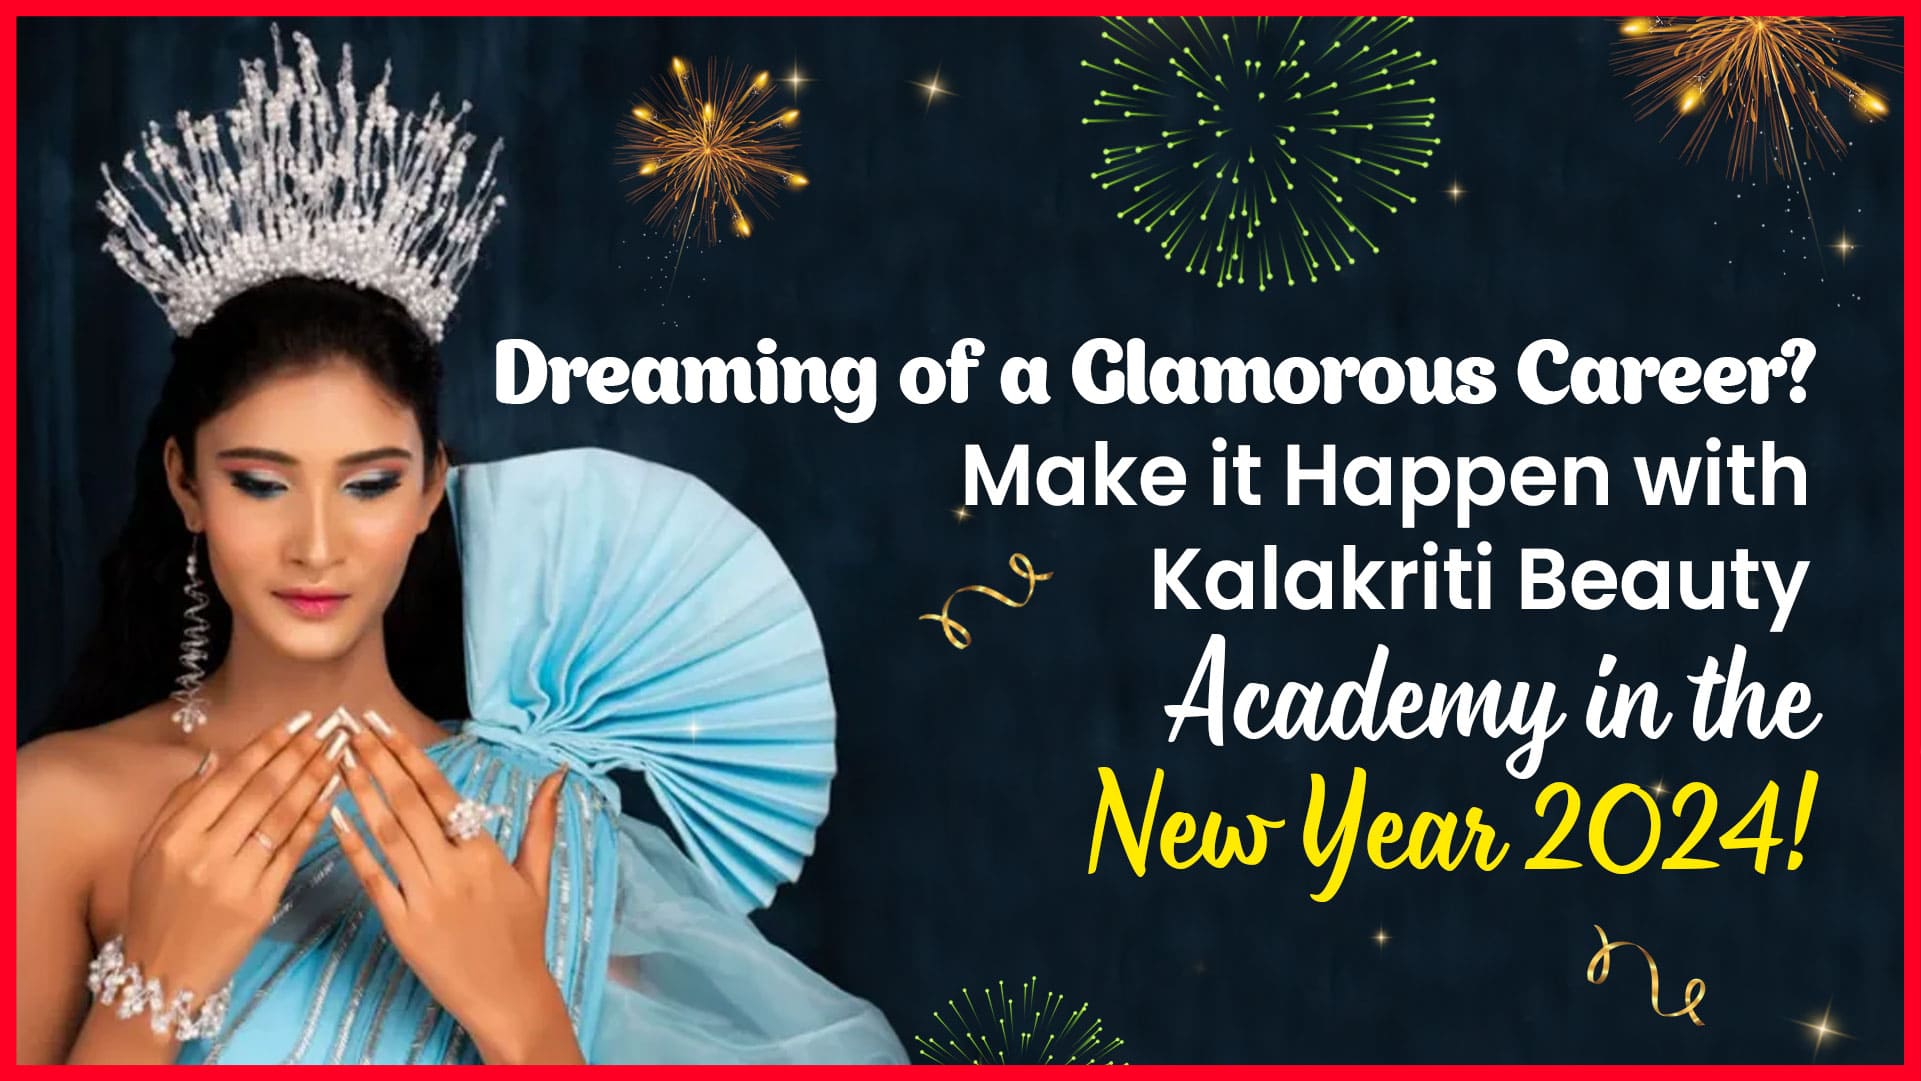 Dreaming of a Glamorous Career? Make it Happen with Kalakriti Beauty Academy in the New Year 2024!